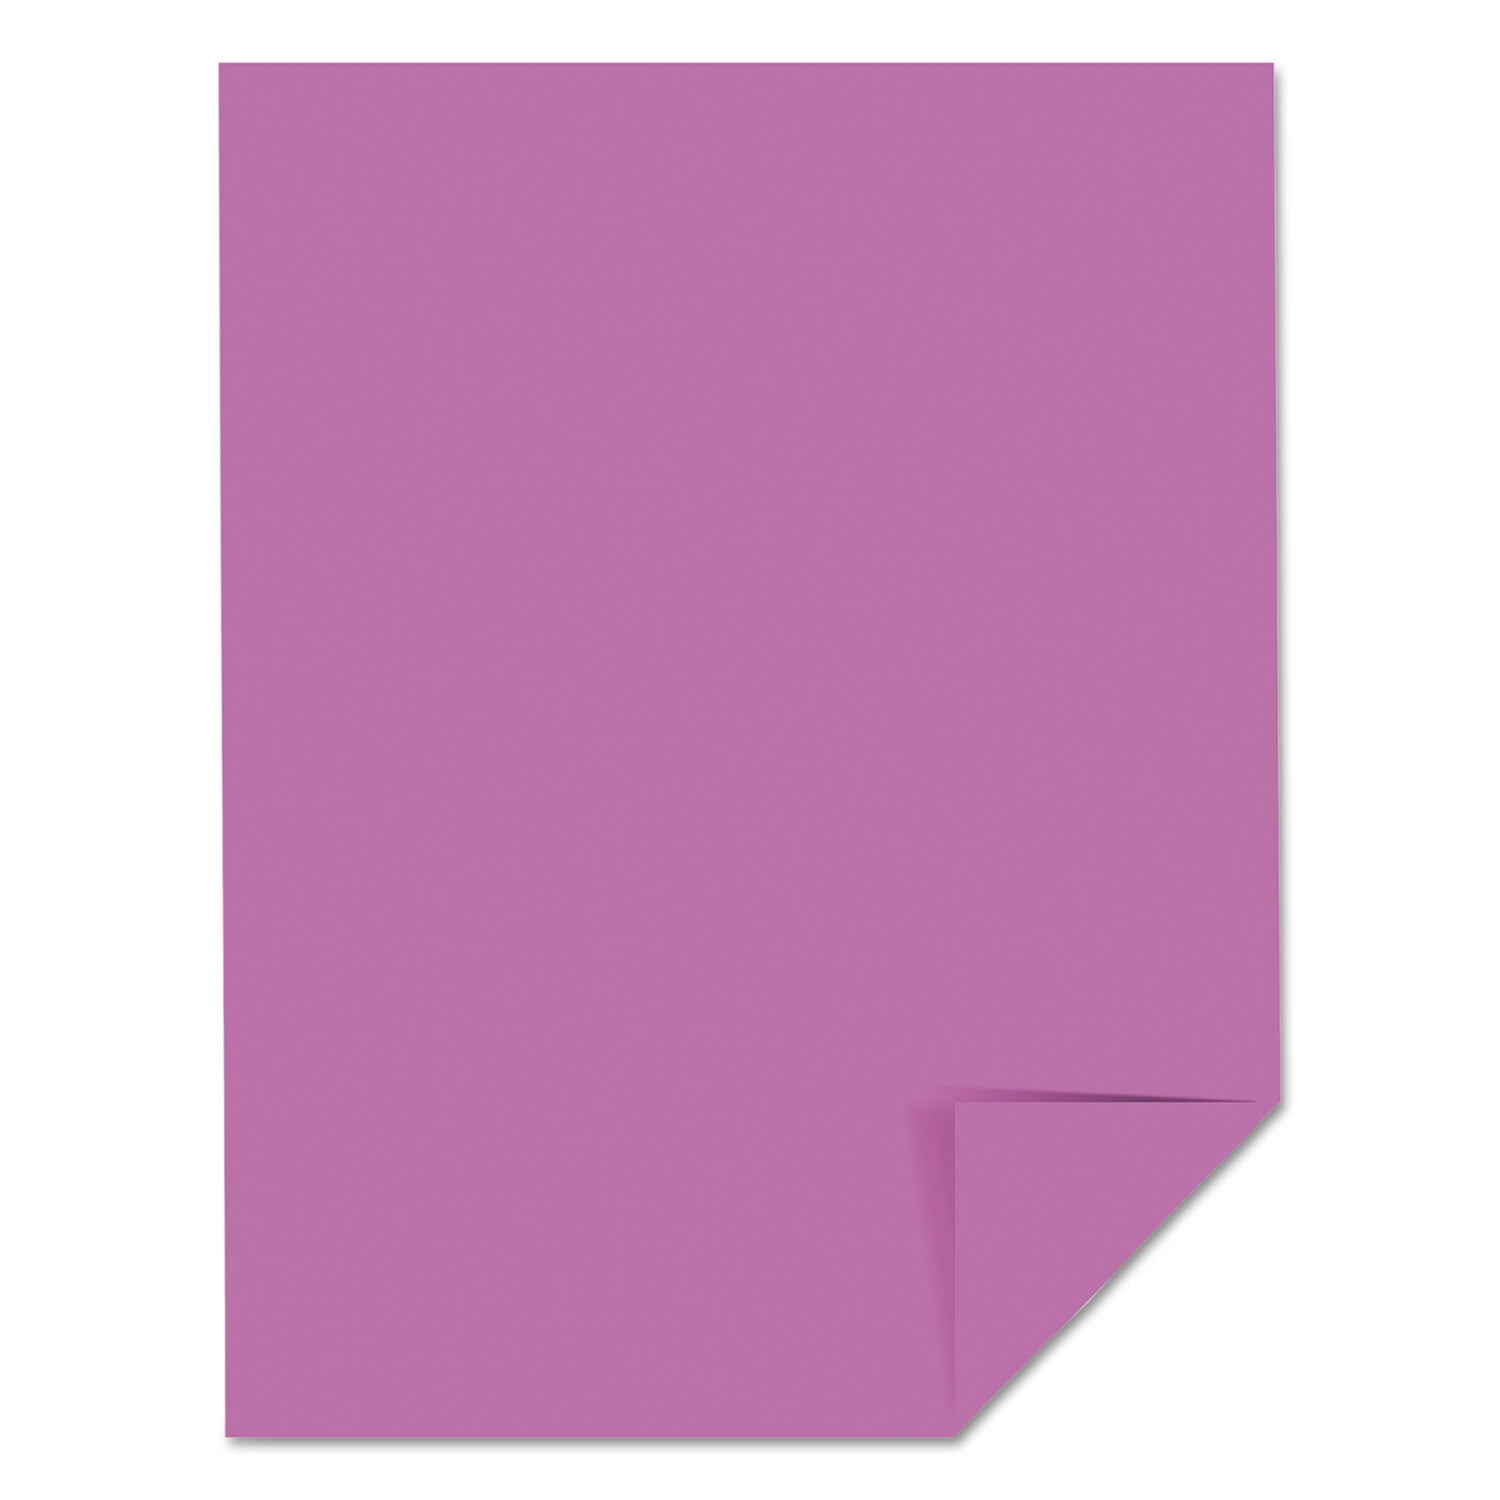 Astrobrights-1pk Color Cardstock, 65 lb Cover Weight, 8.5 x 11, Blast-Off Blue, 250/Pack